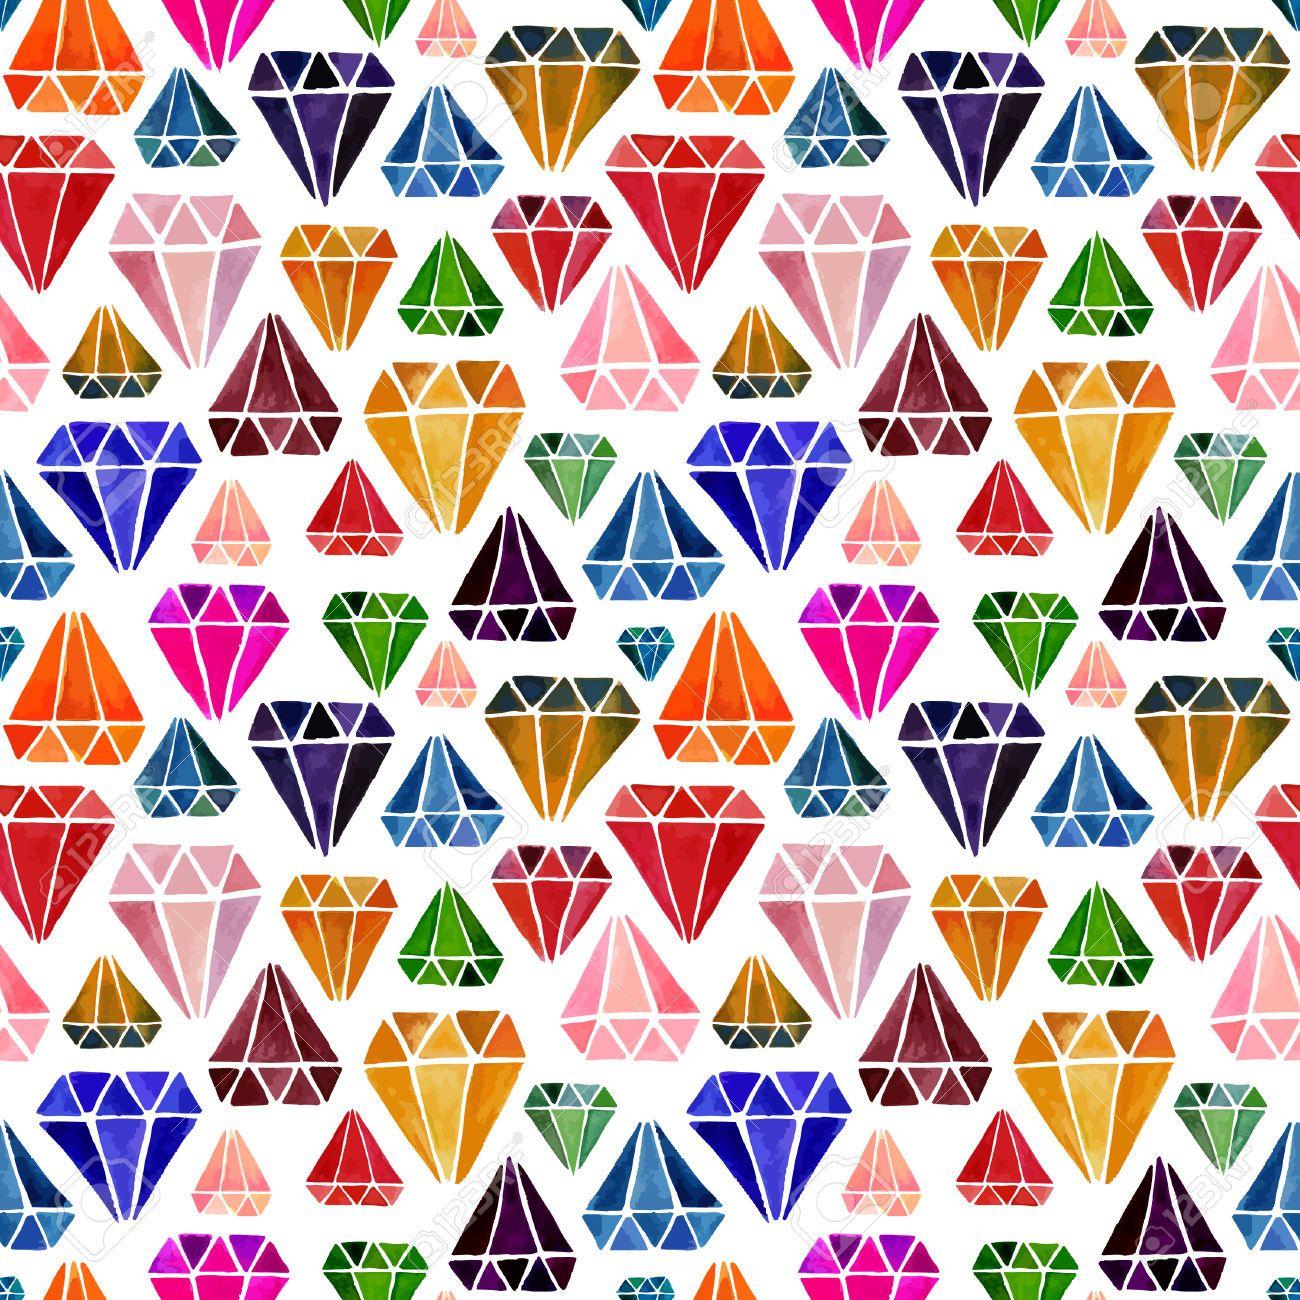 Drawn diamonds background pattern and in color drawn